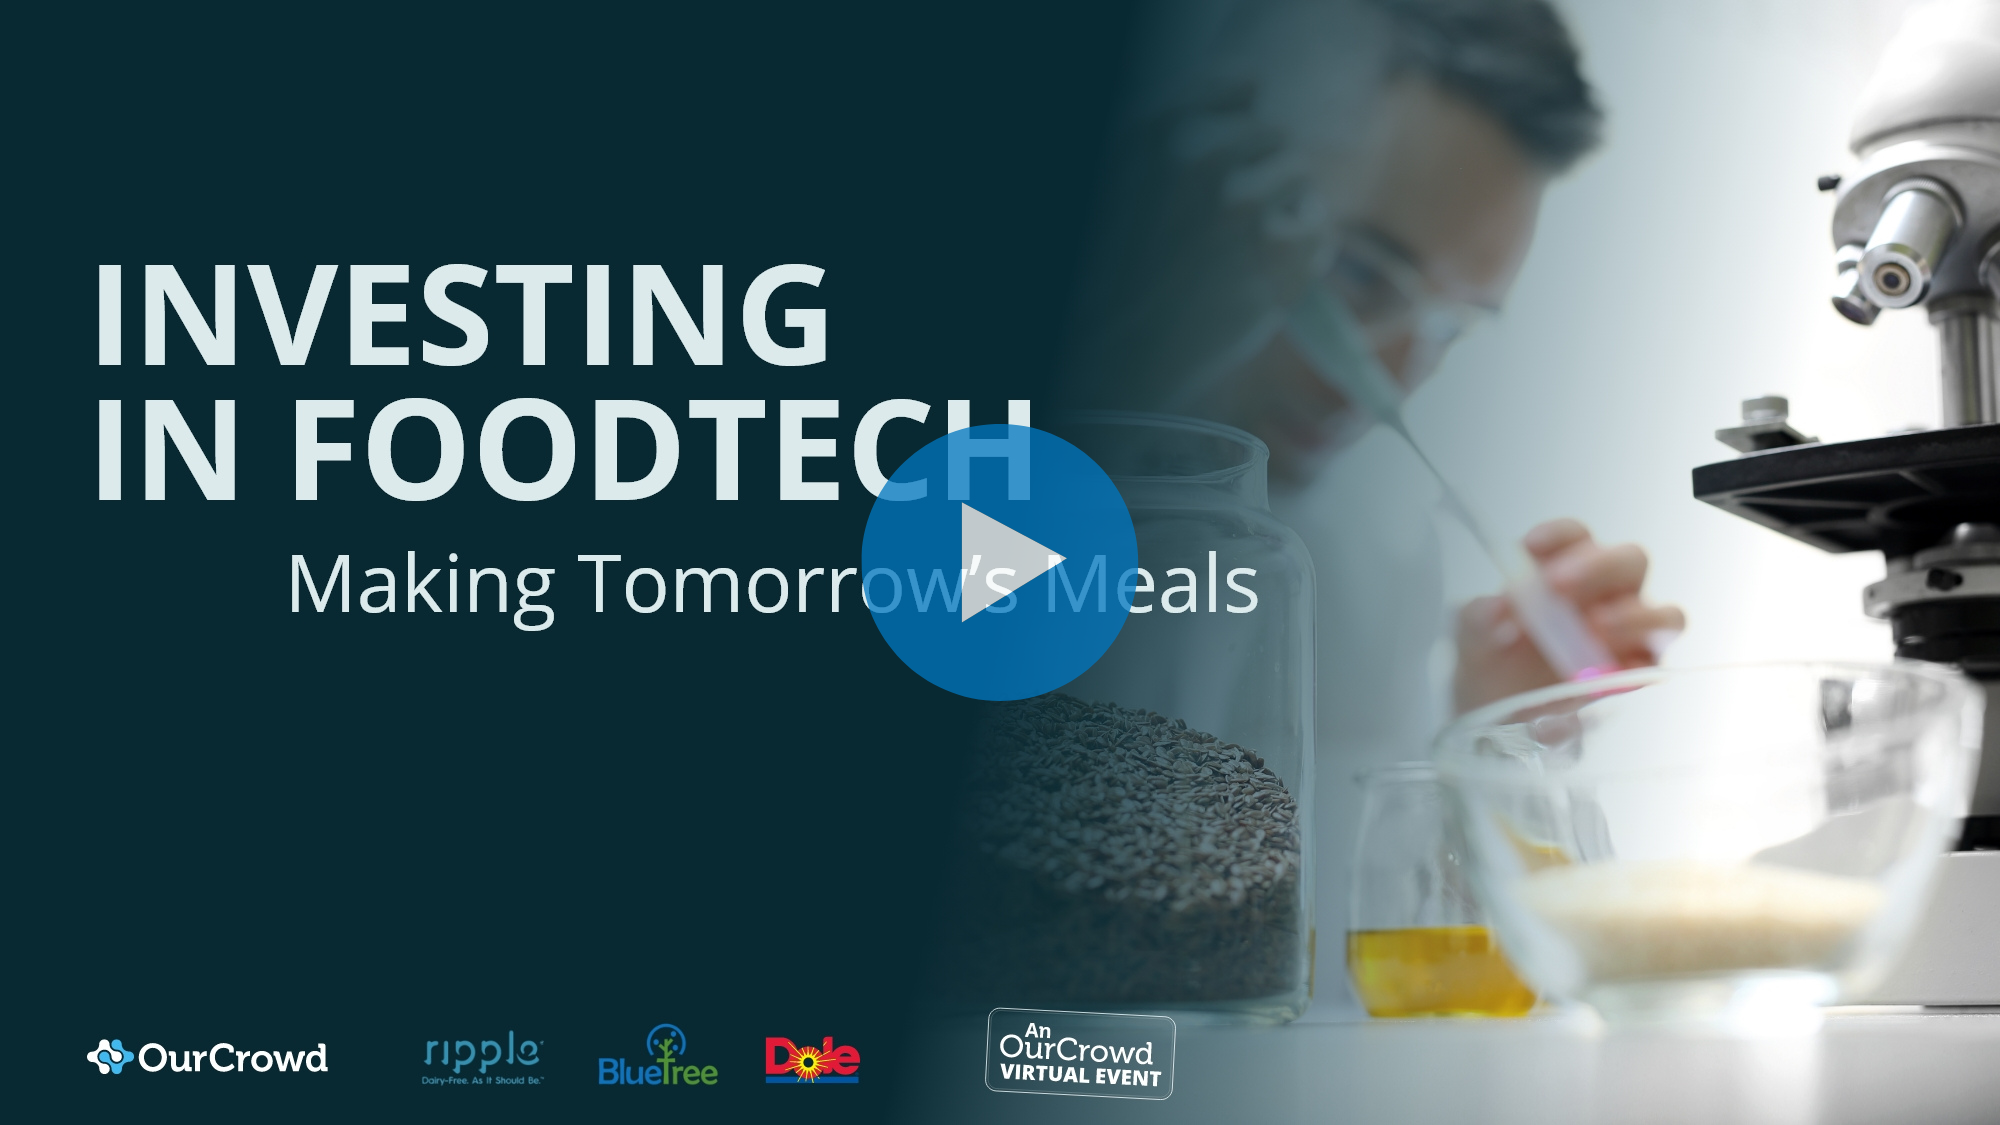 Investing in FoodTech